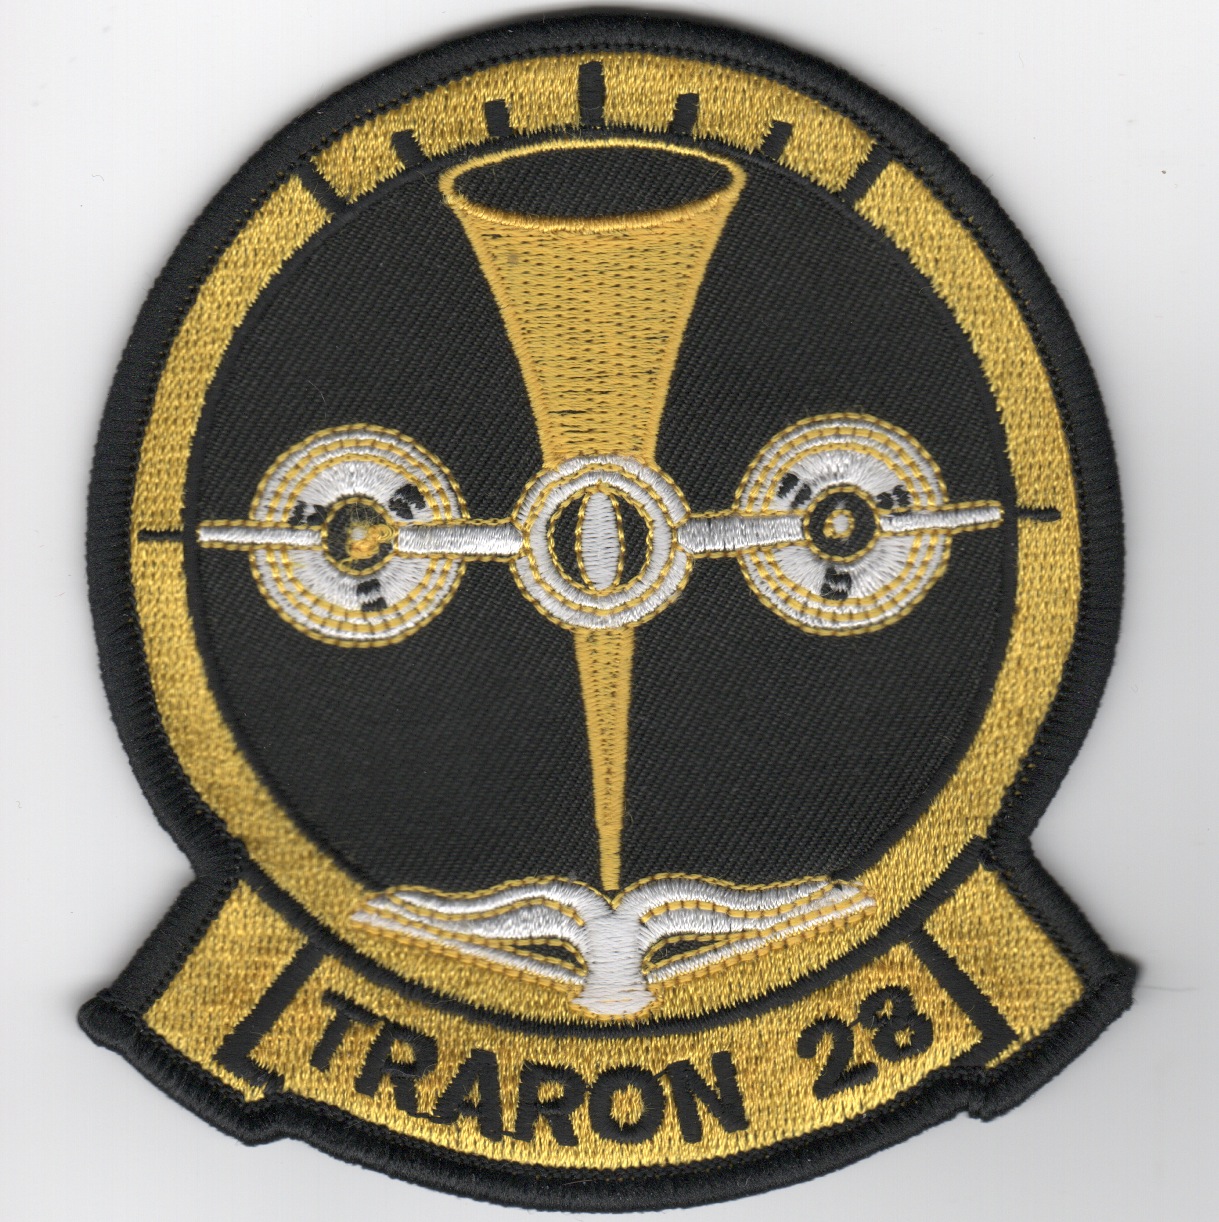 VT-28 Squadron Patch (Old Style)